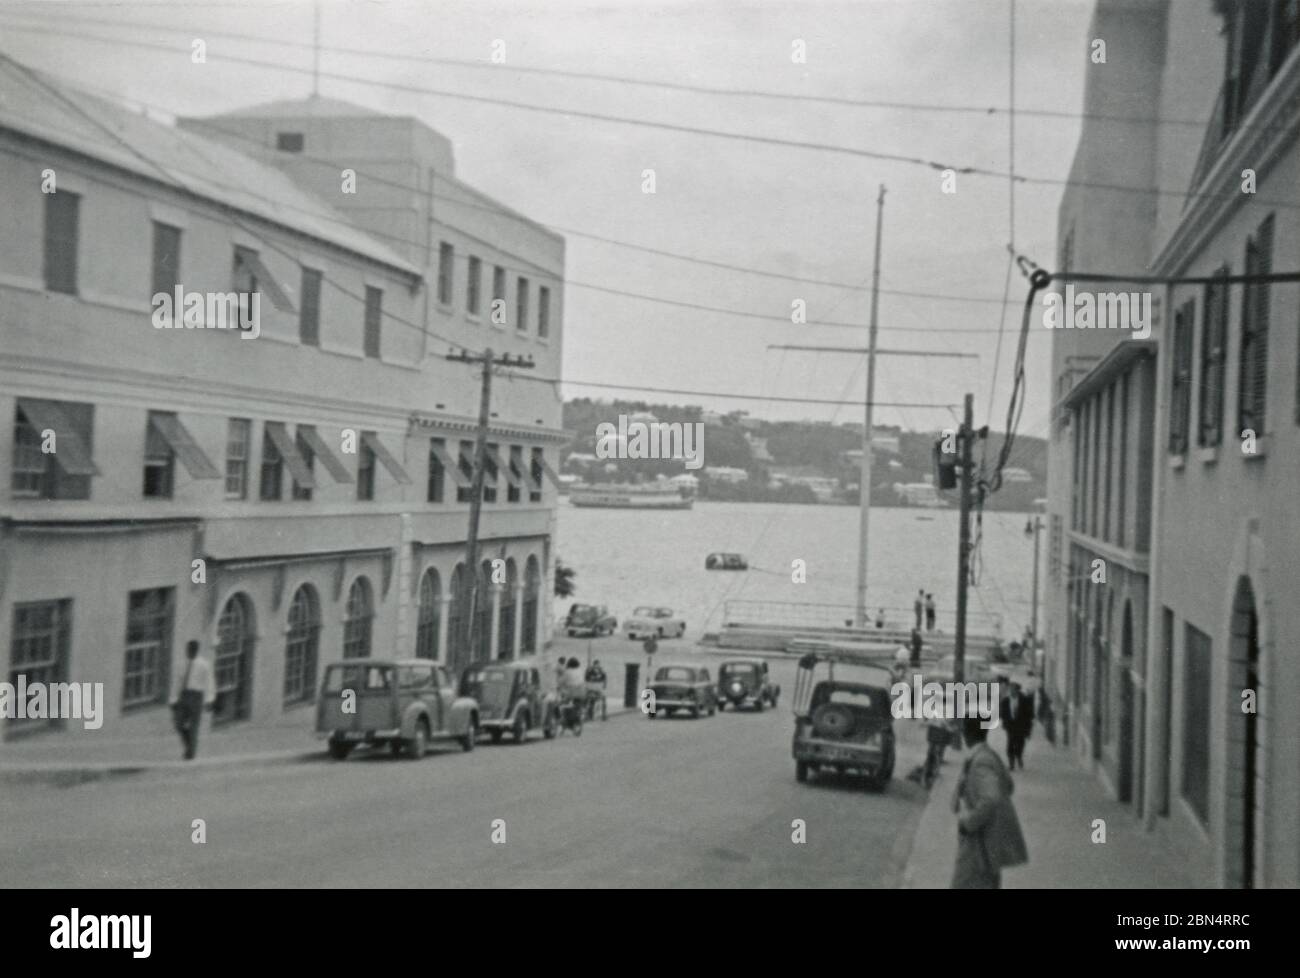 Vintage photograph, from Burnaby Street looking toward the flagpole on Front Street in Hamilton, Bermuda on October 30, 1955. Taken by a passenger debarked from a cruise ship. SOURCE: ORIGINAL PHOTOGRAPH Stock Photo